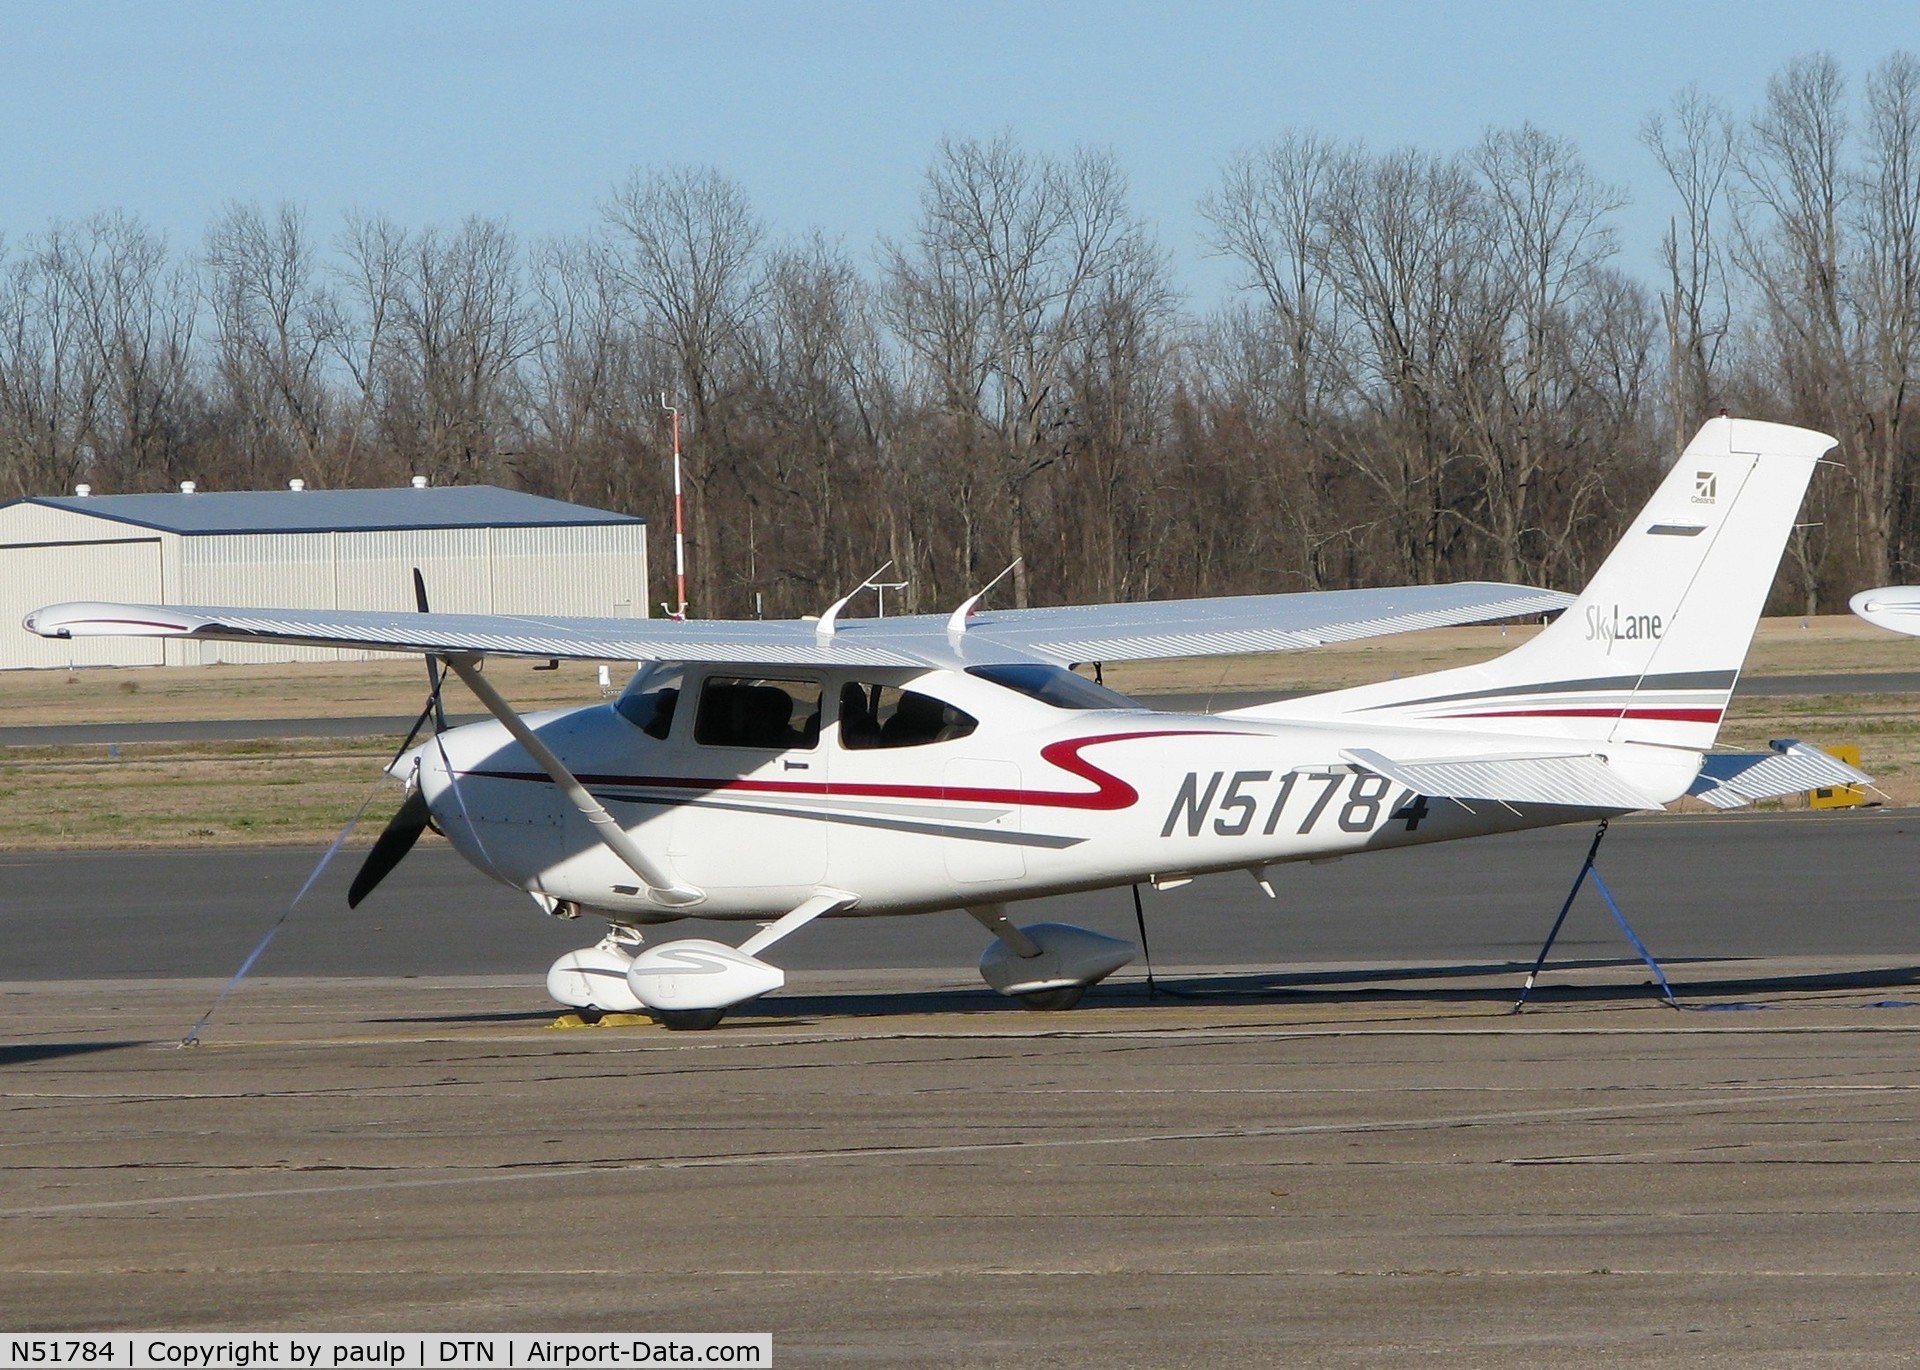 N51784, 2002 Cessna 182T Skylane C/N 18281097, Parked at the Downtown Shreveport airport.